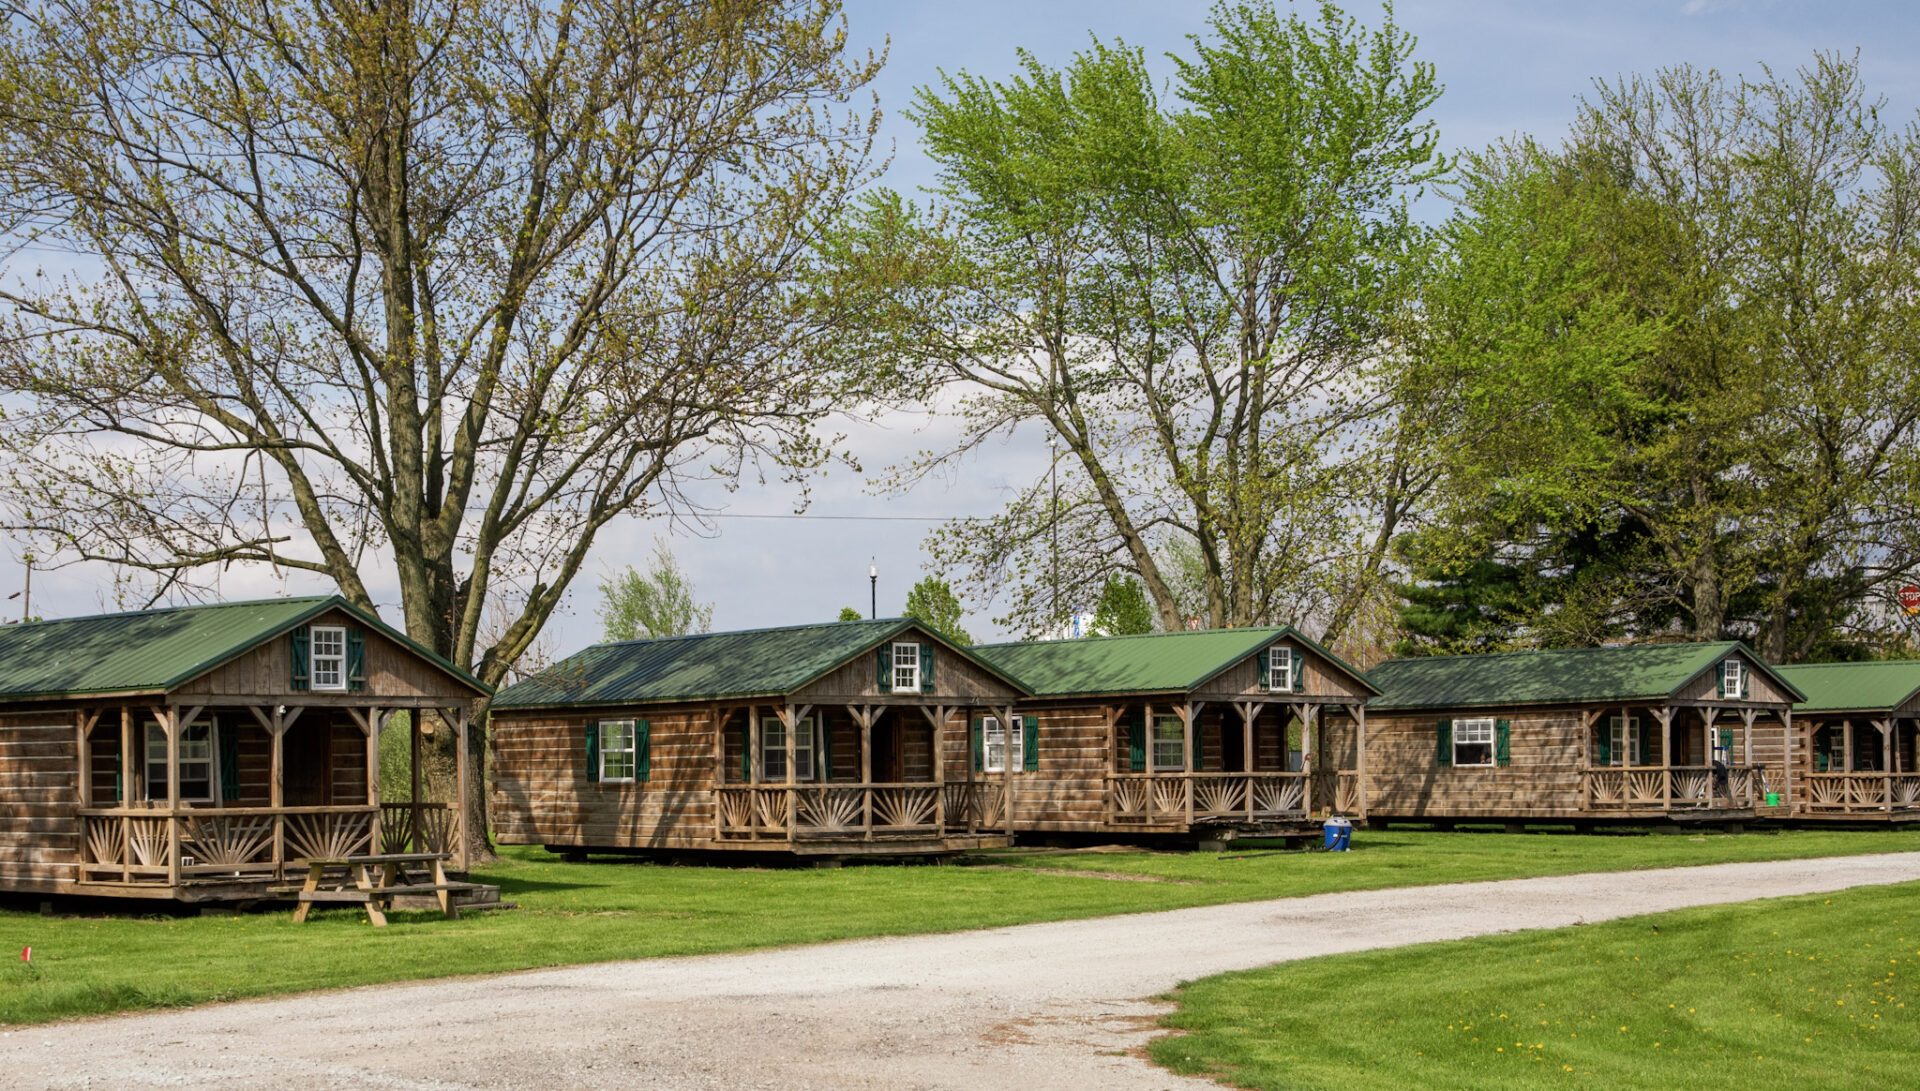 A shot of the Mystic Waters Campground rustic cabins